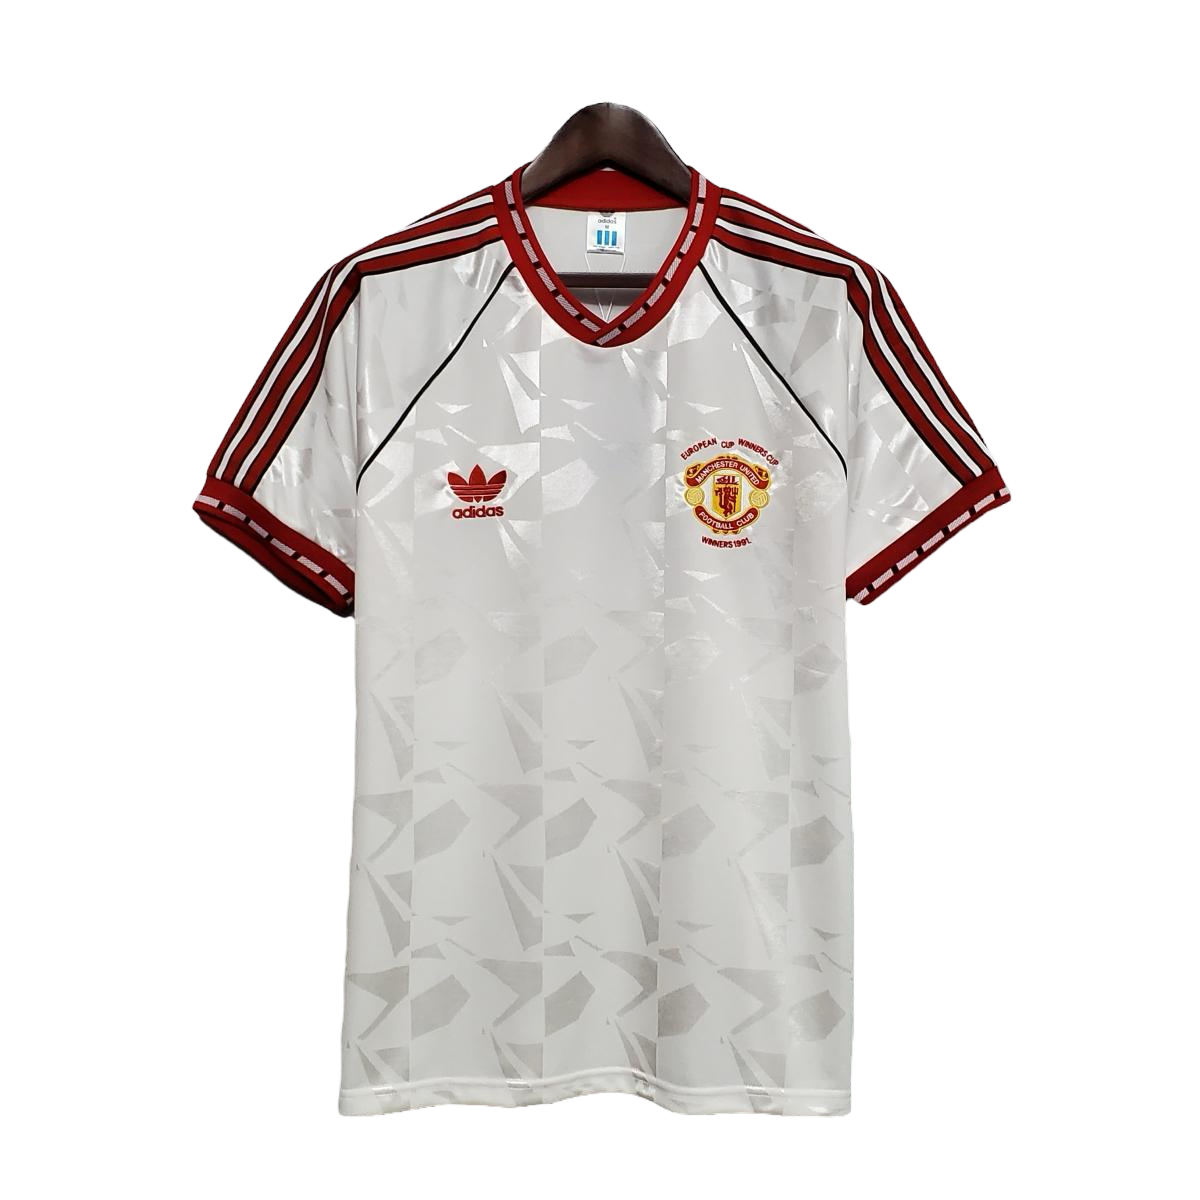 1991 Manchester United European Cup Winners Jersey